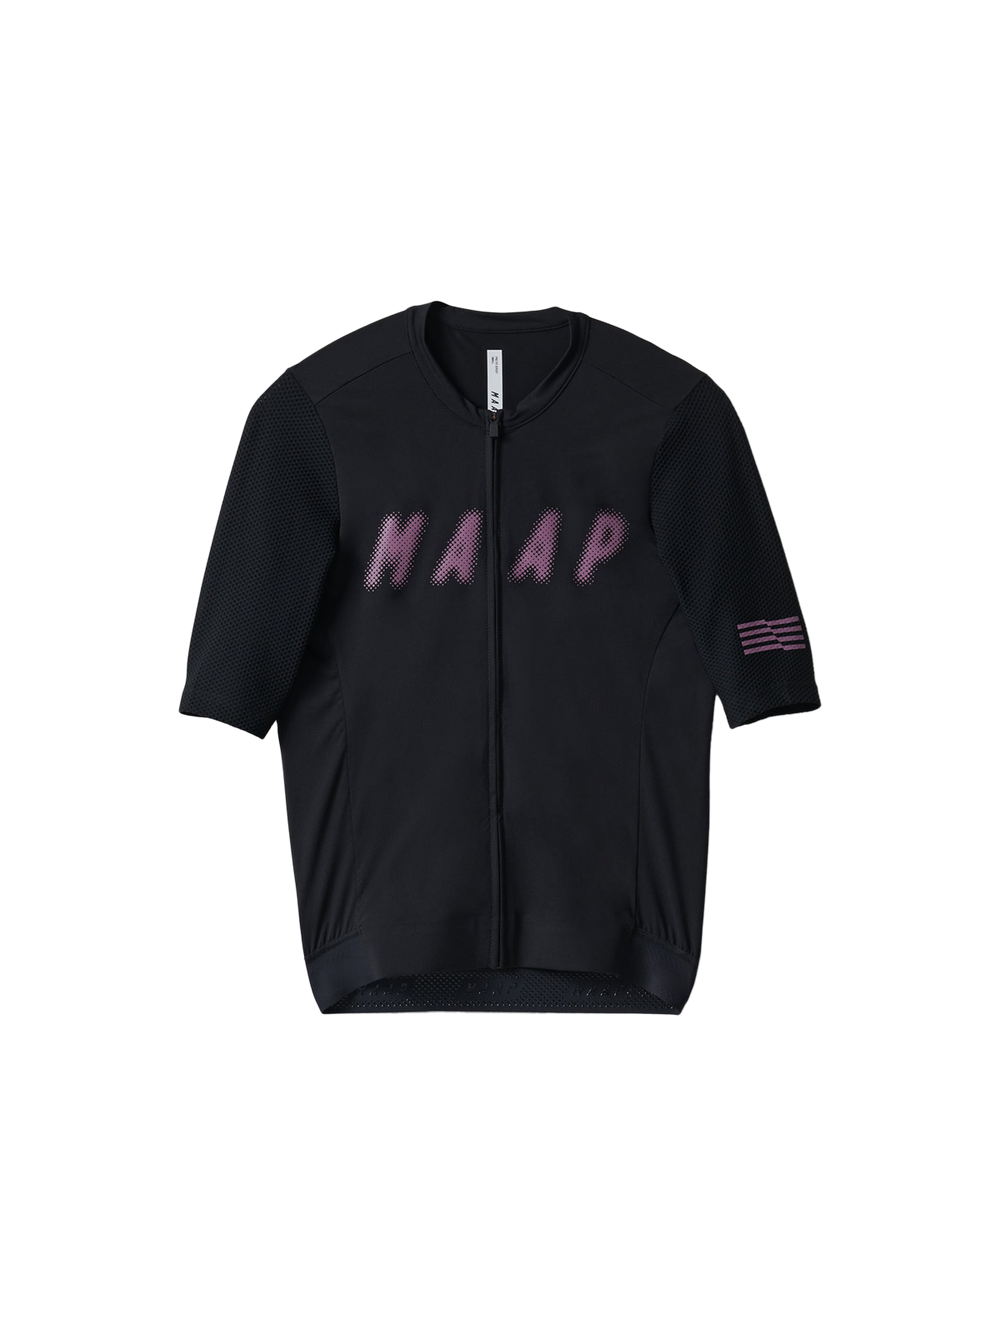 Product Image for Halftone Pro Base Jersey